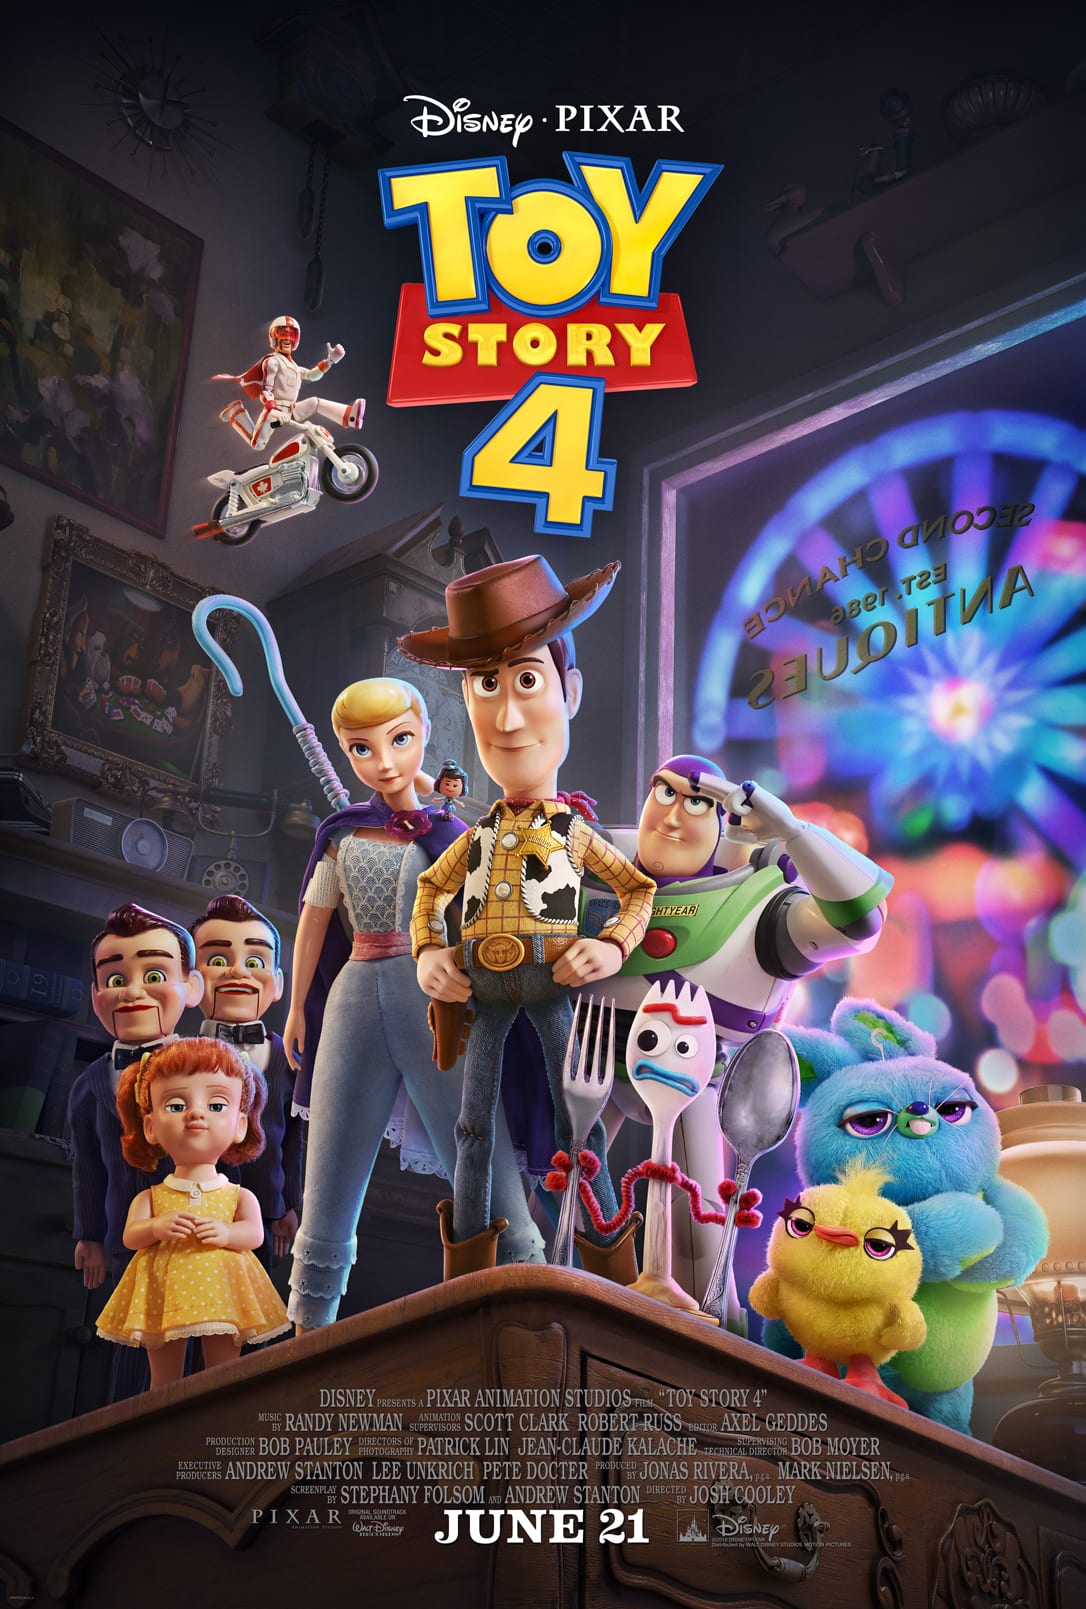 Toy Story 4 Trailer